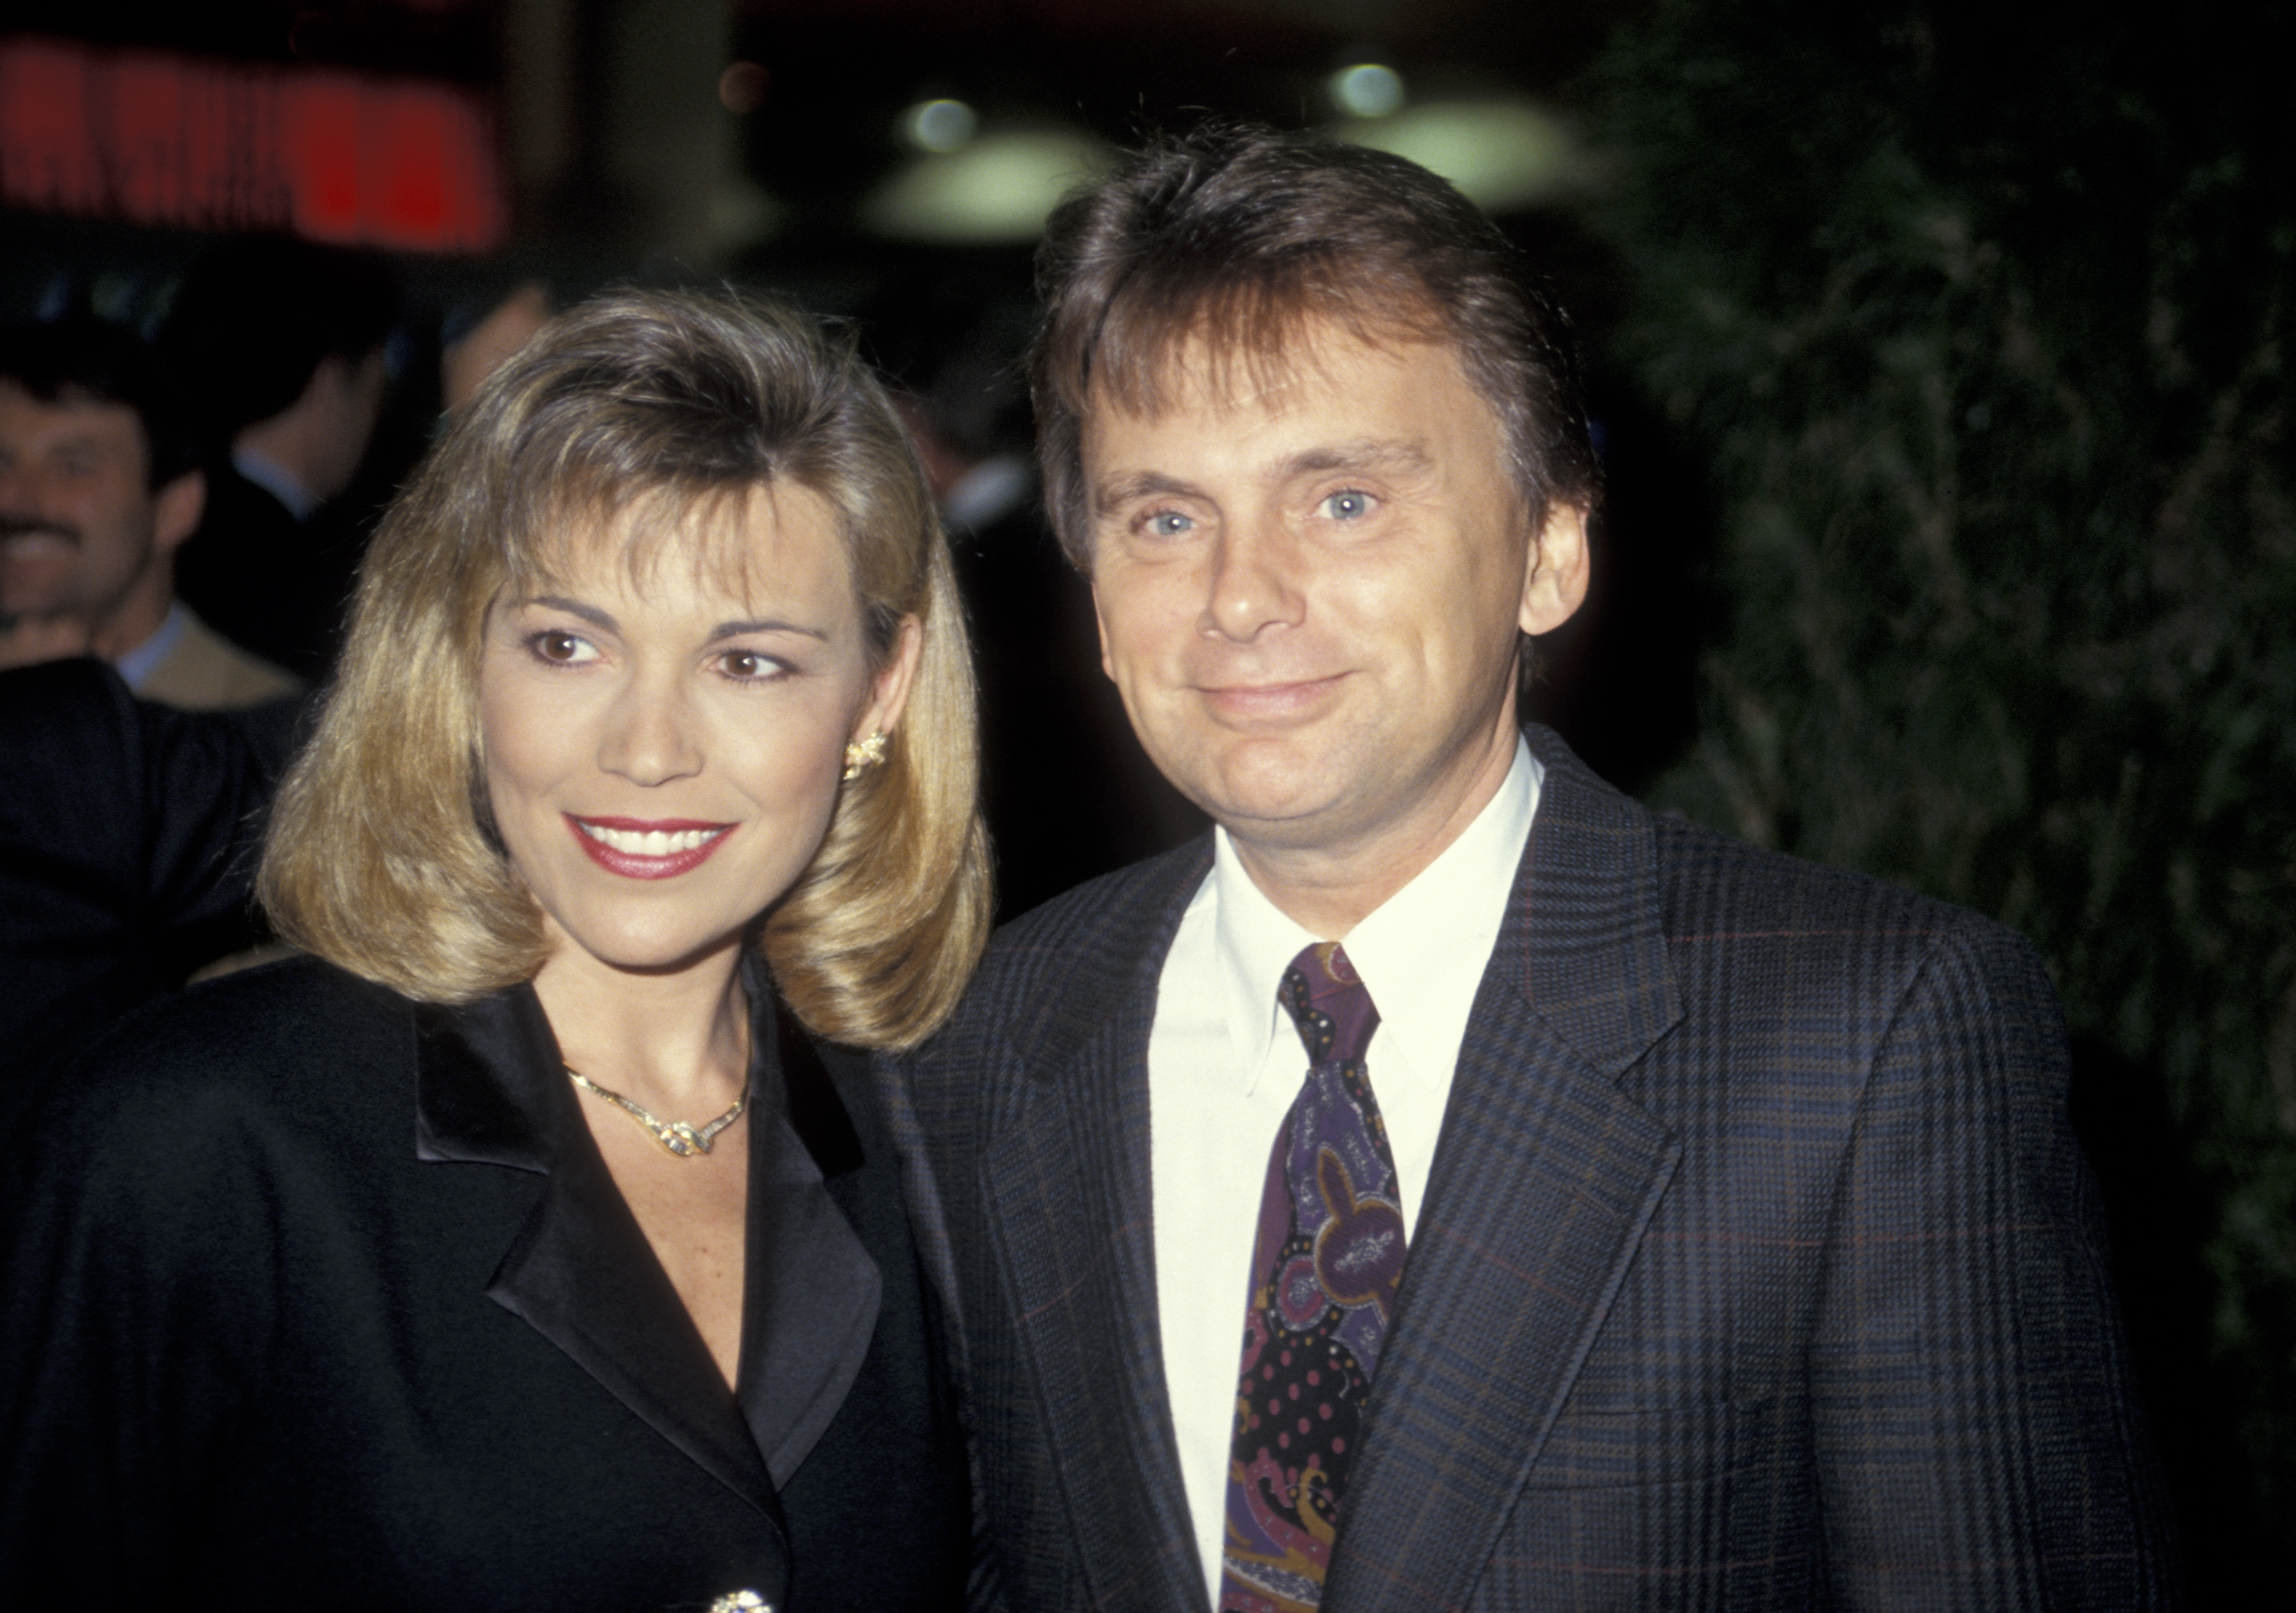 Vanna White and Pat Sajak at the "National Association of Program Television Executives Convention" in San Francisco, California on January 27, 1993 | Source: Getty Images